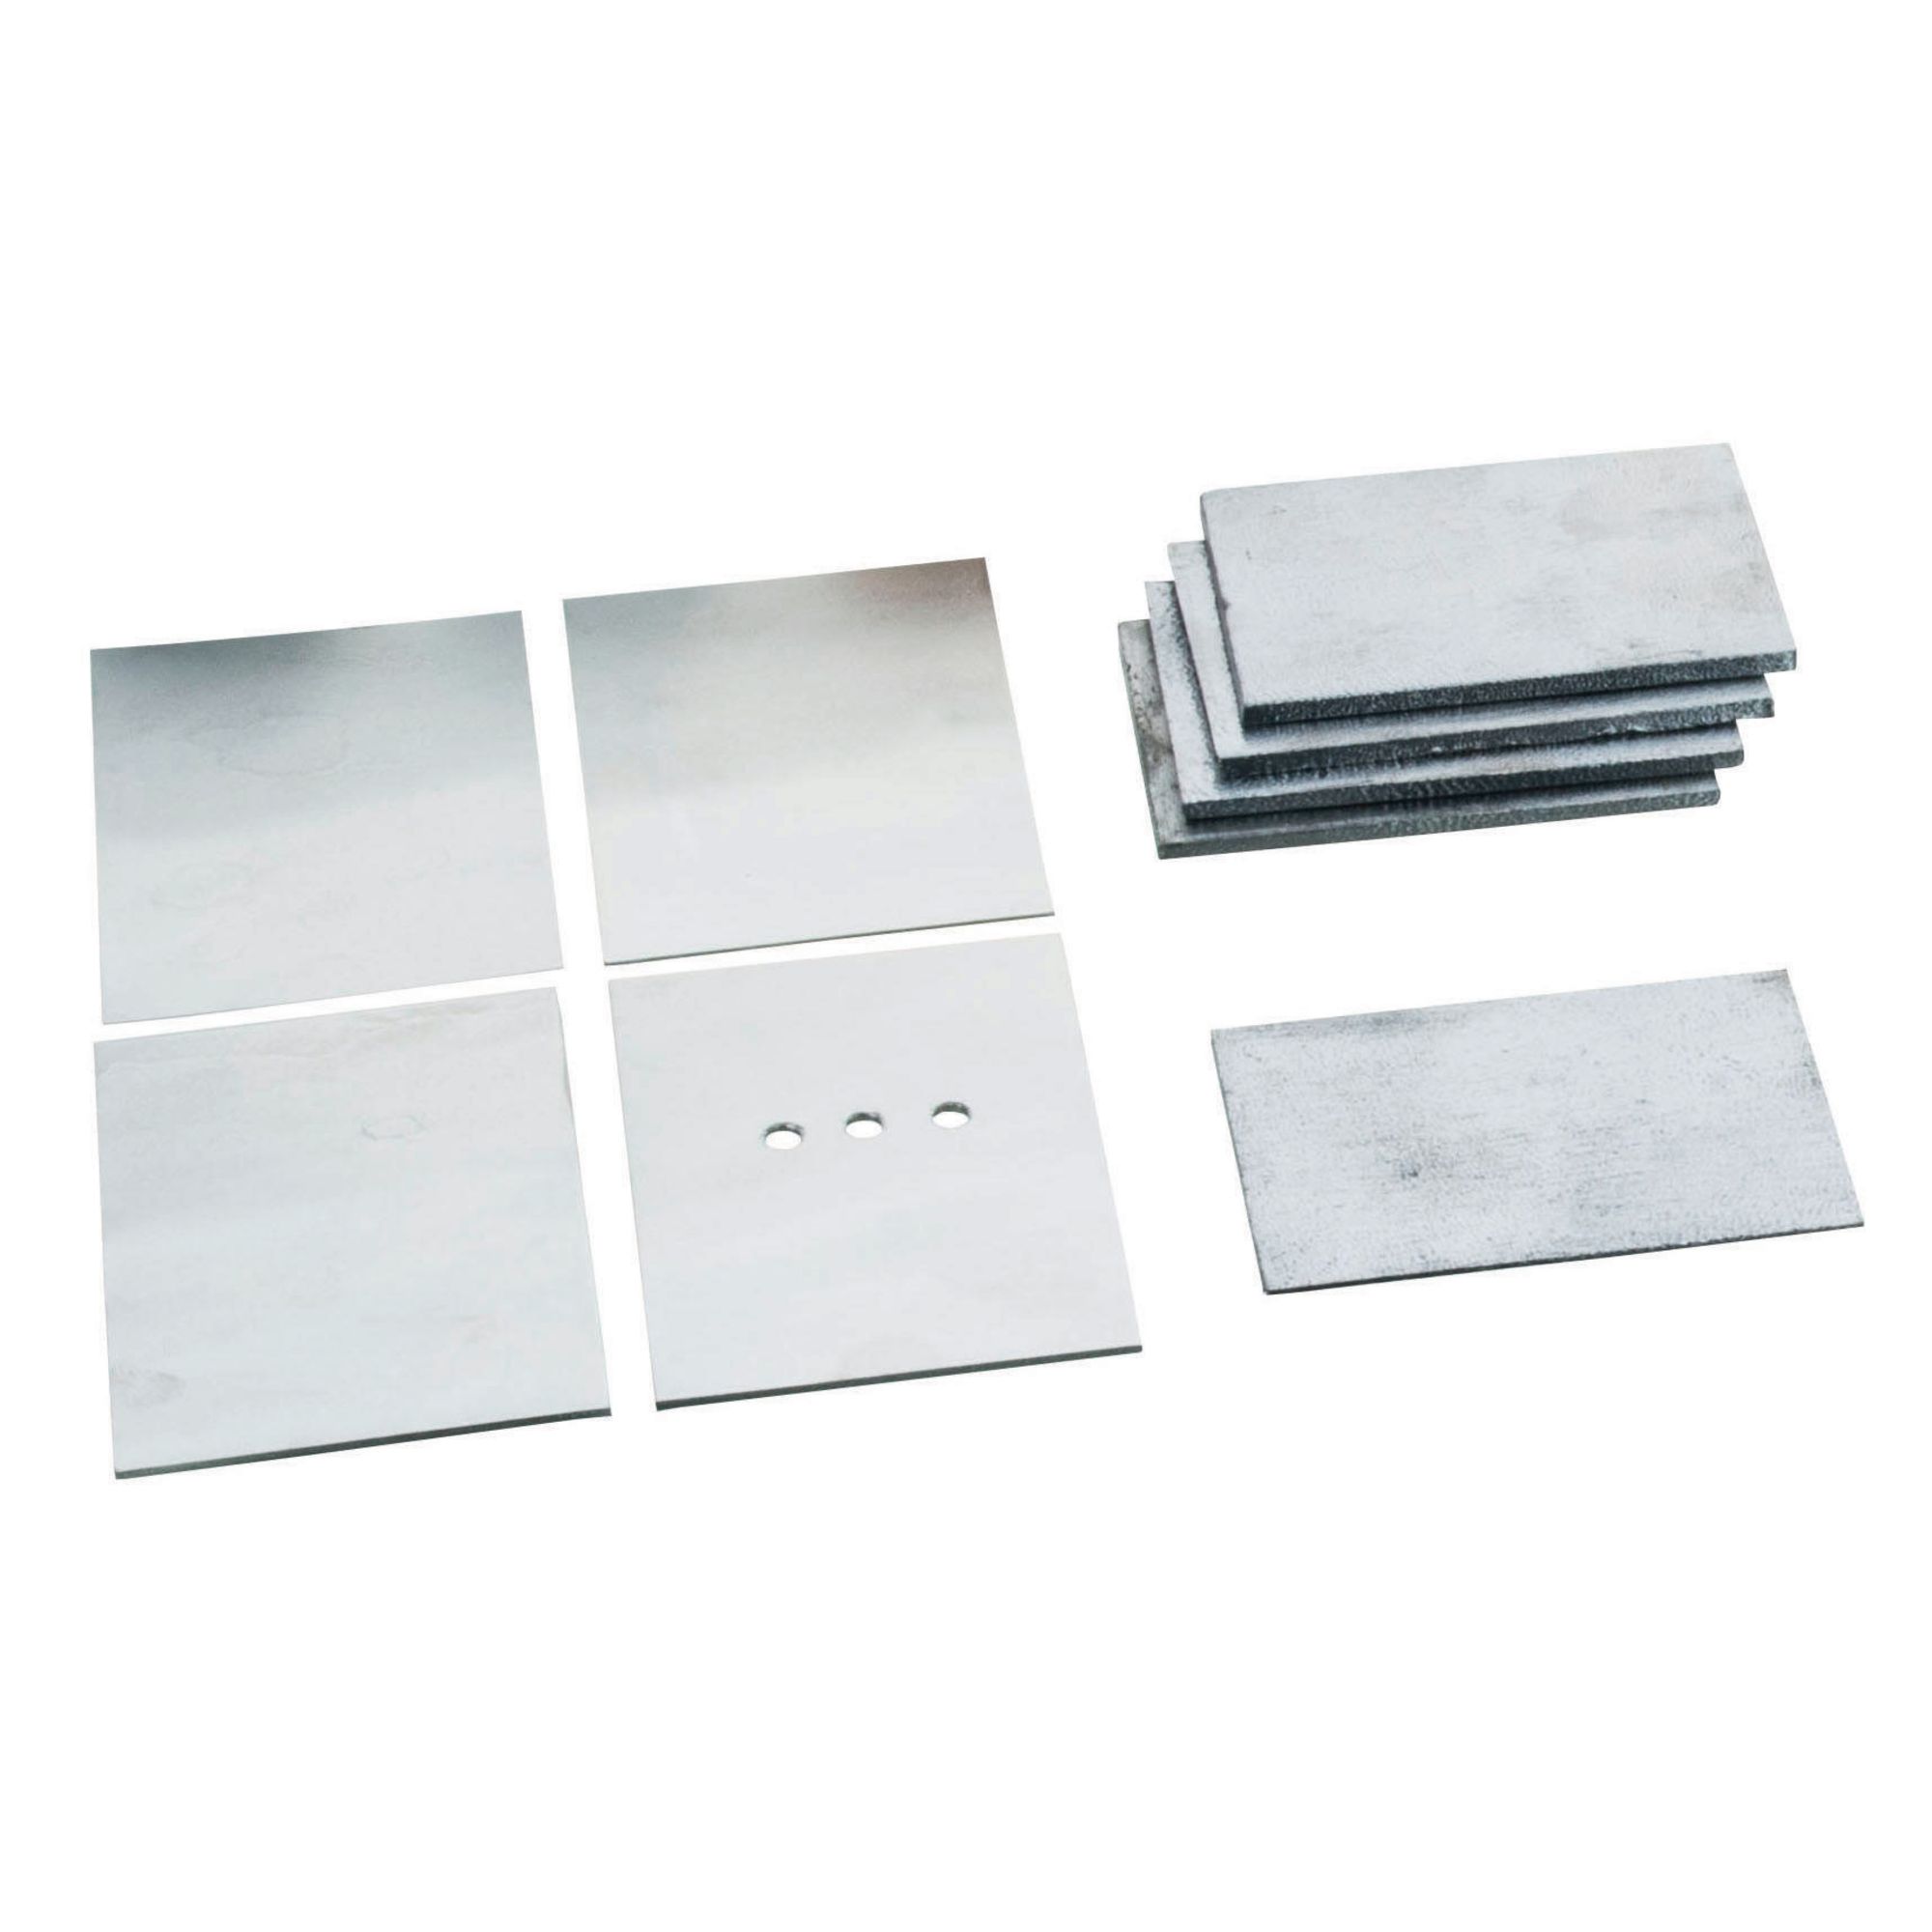 Absorber Plates